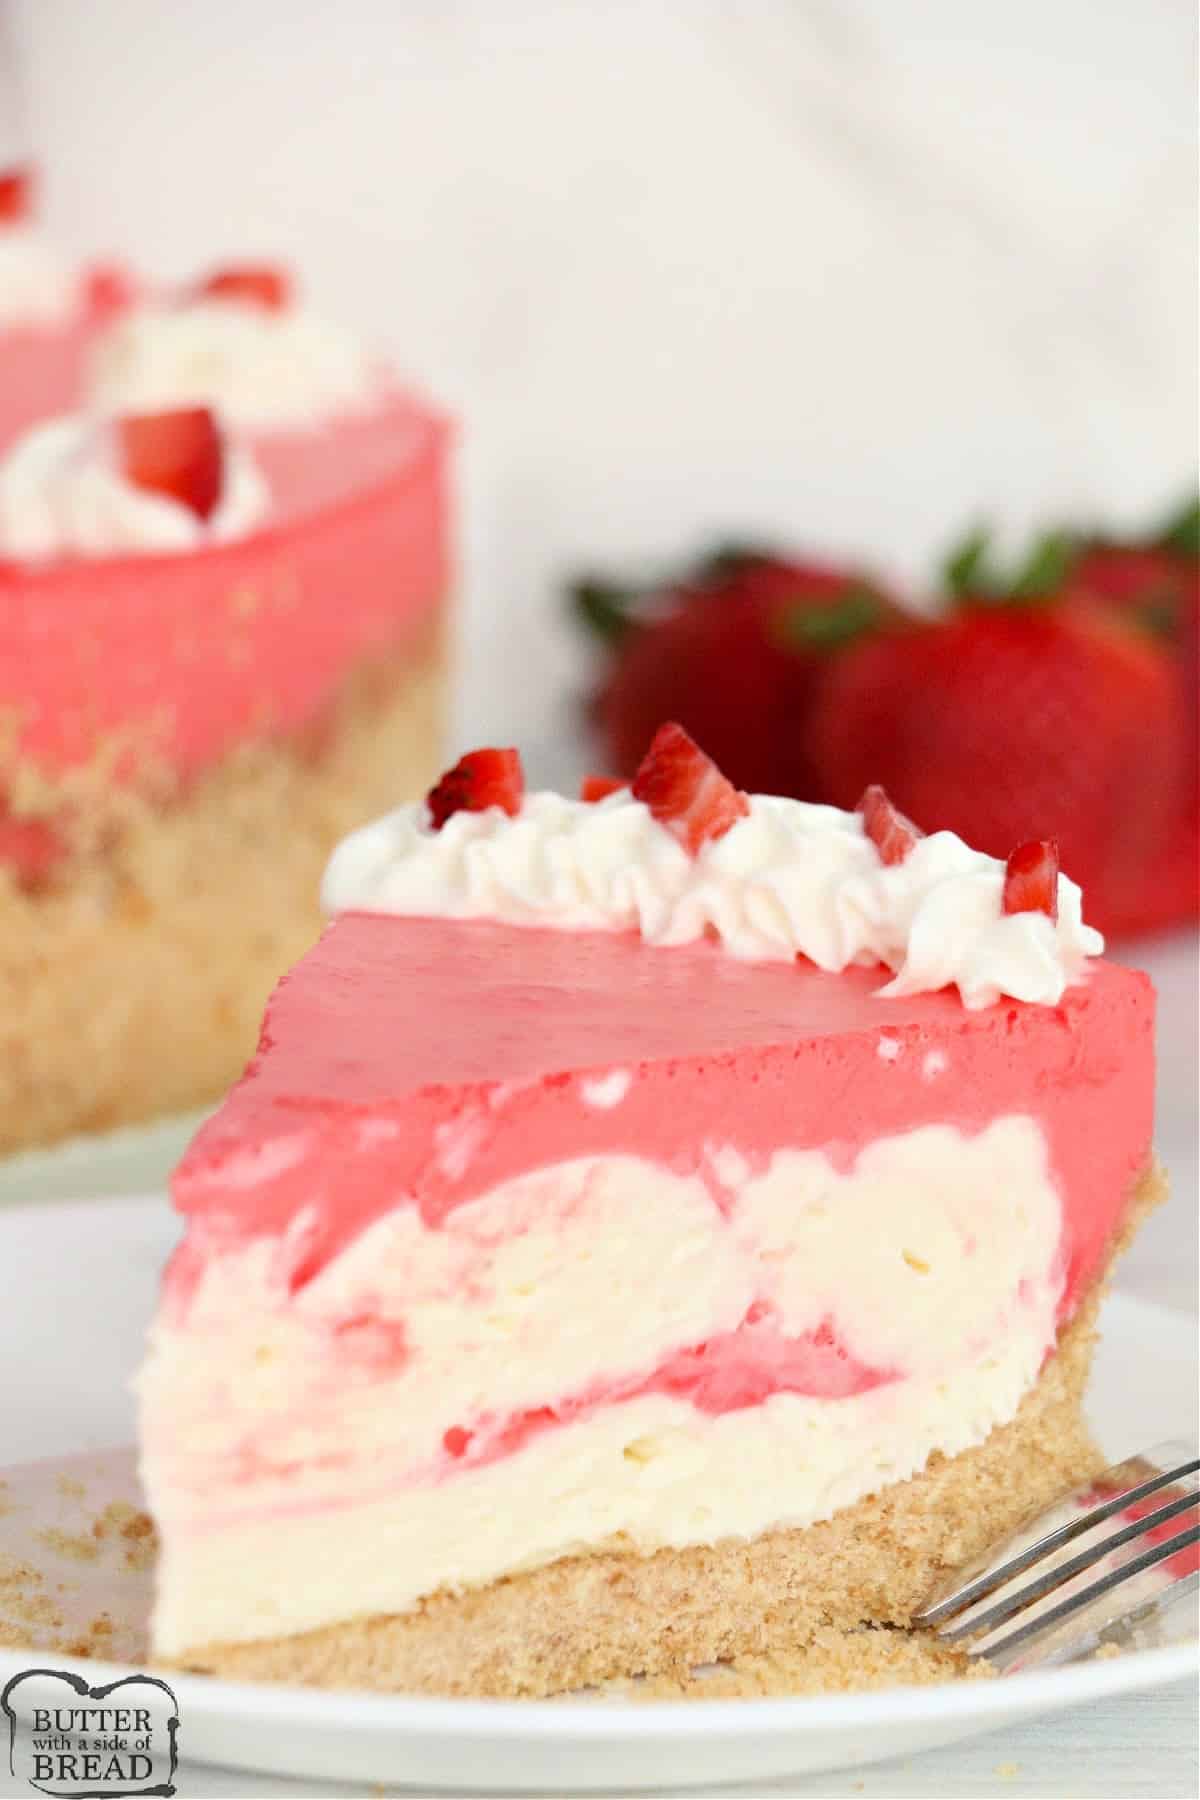 Simple no bake cheesecake made with strawberry jello